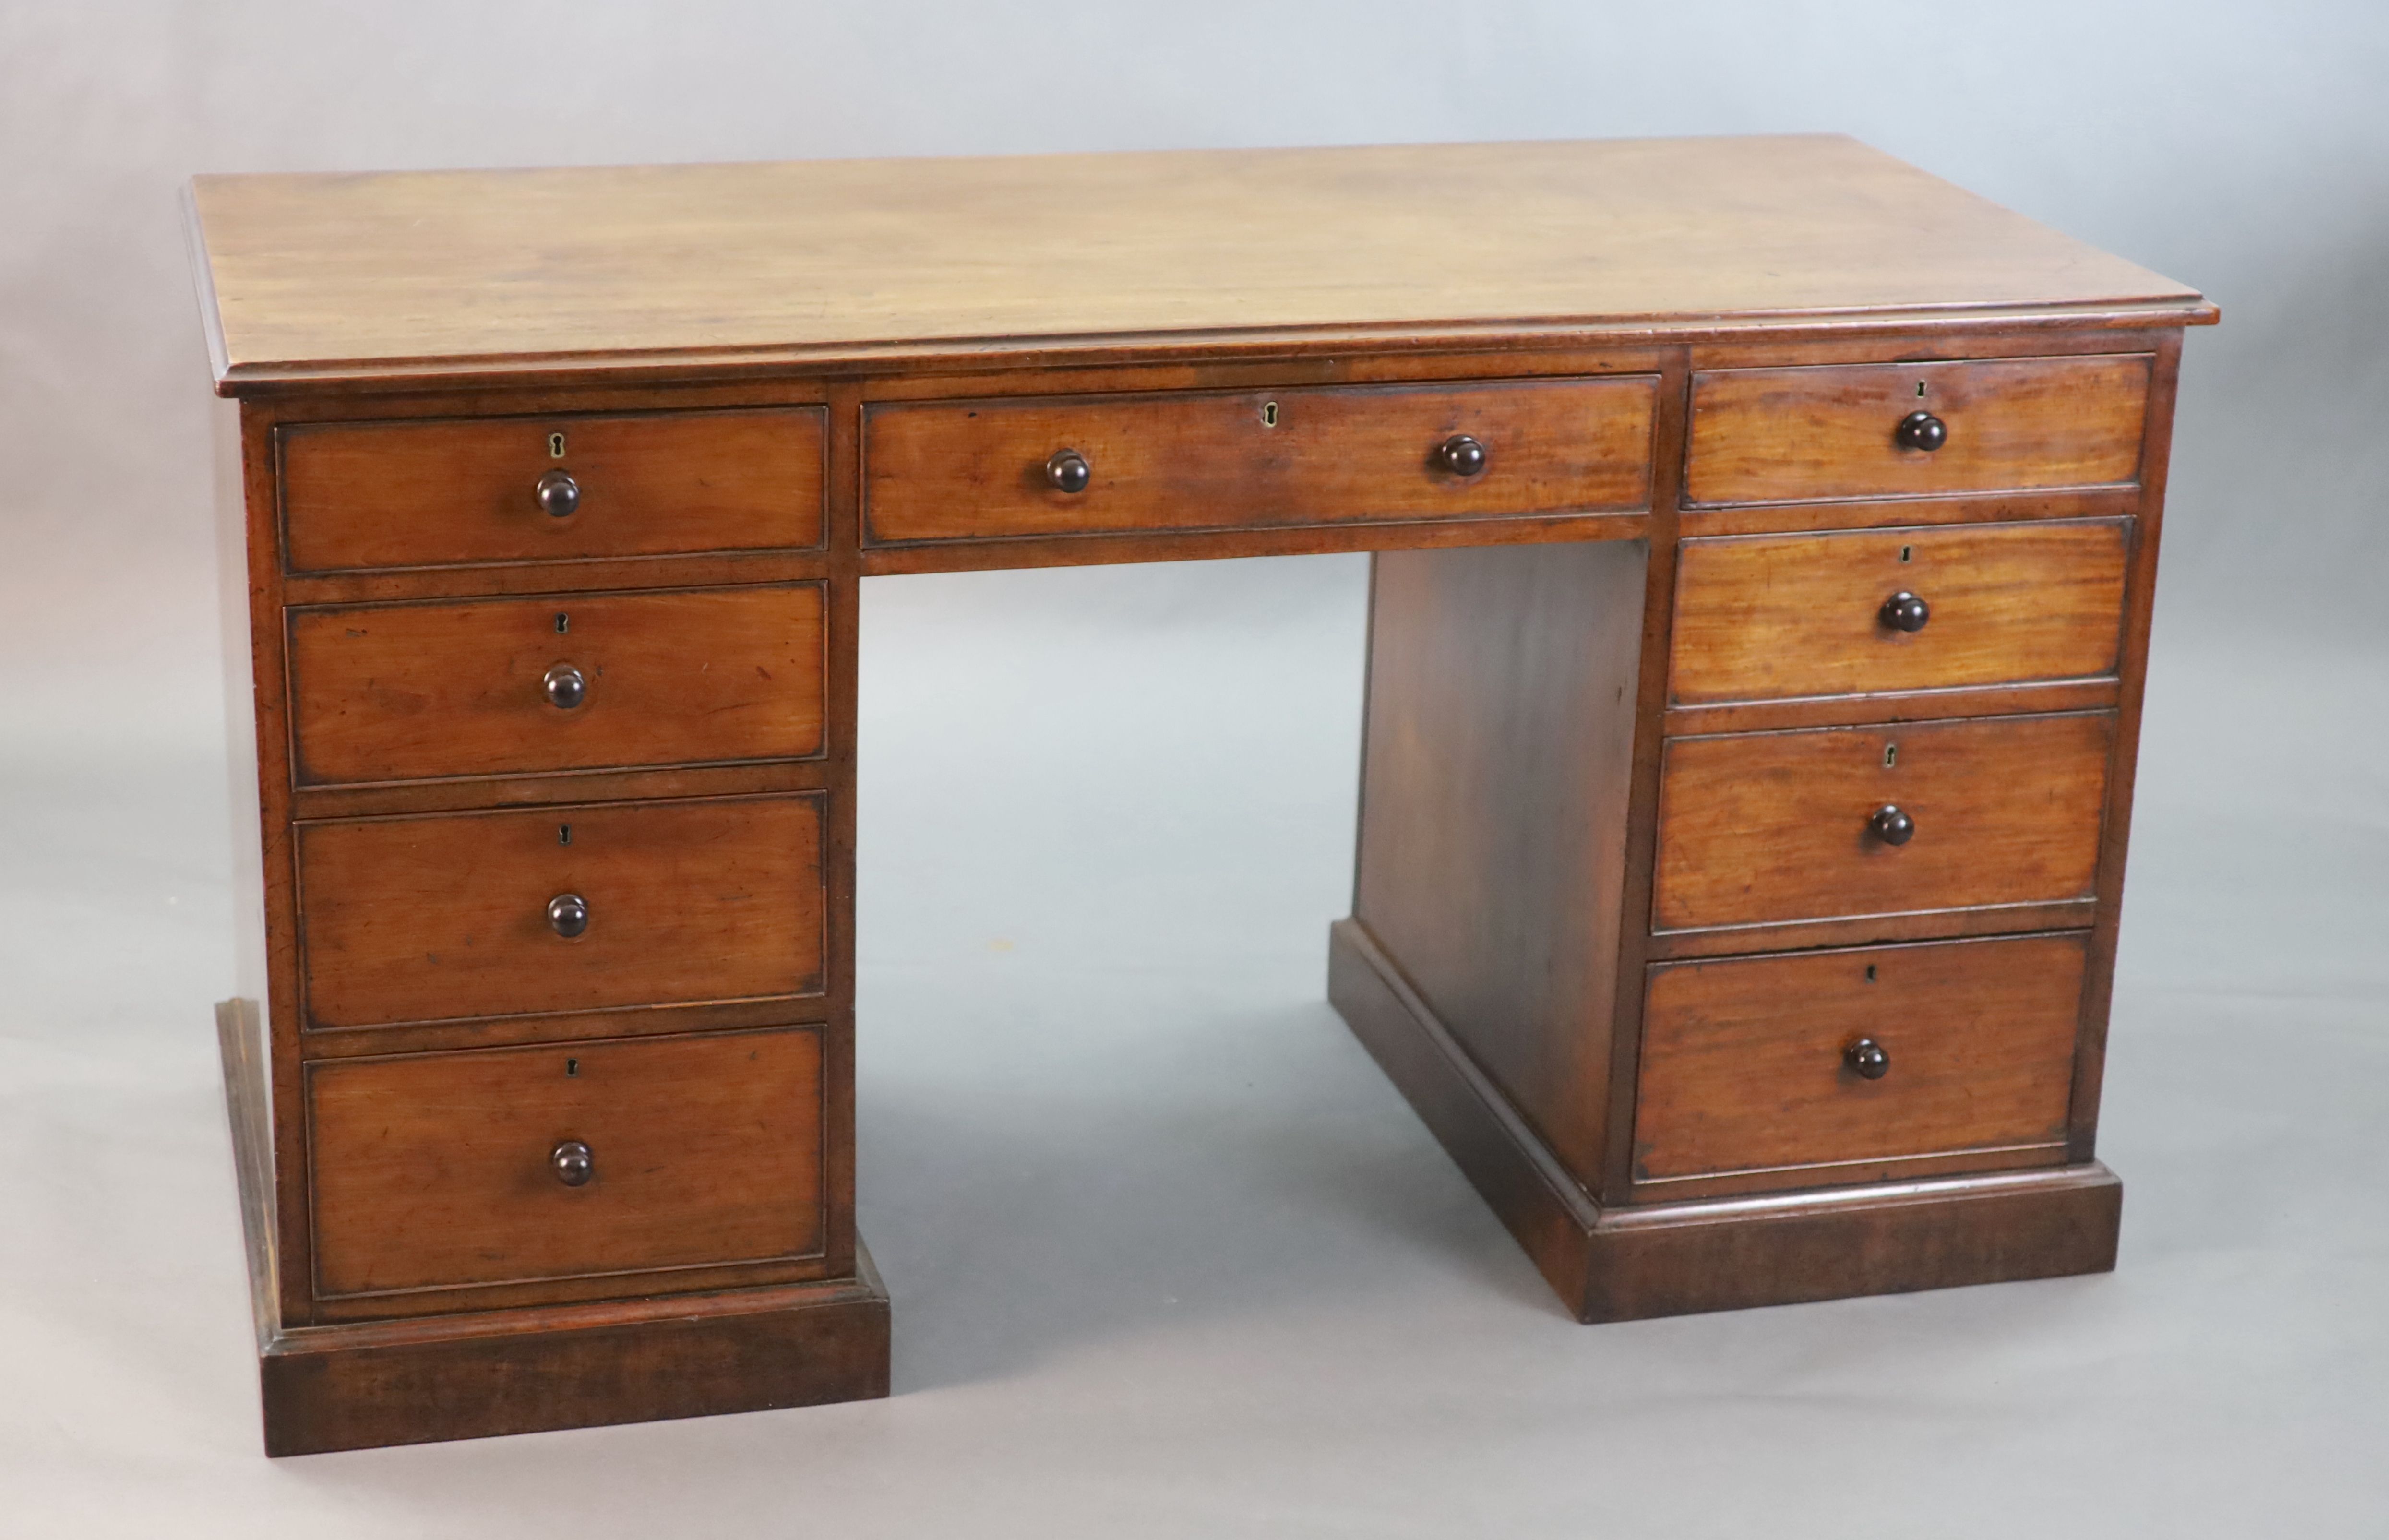 A George III mahogany kneehole desk, W.4ft 8in. D.2ft 2in. H.2ft 7in.